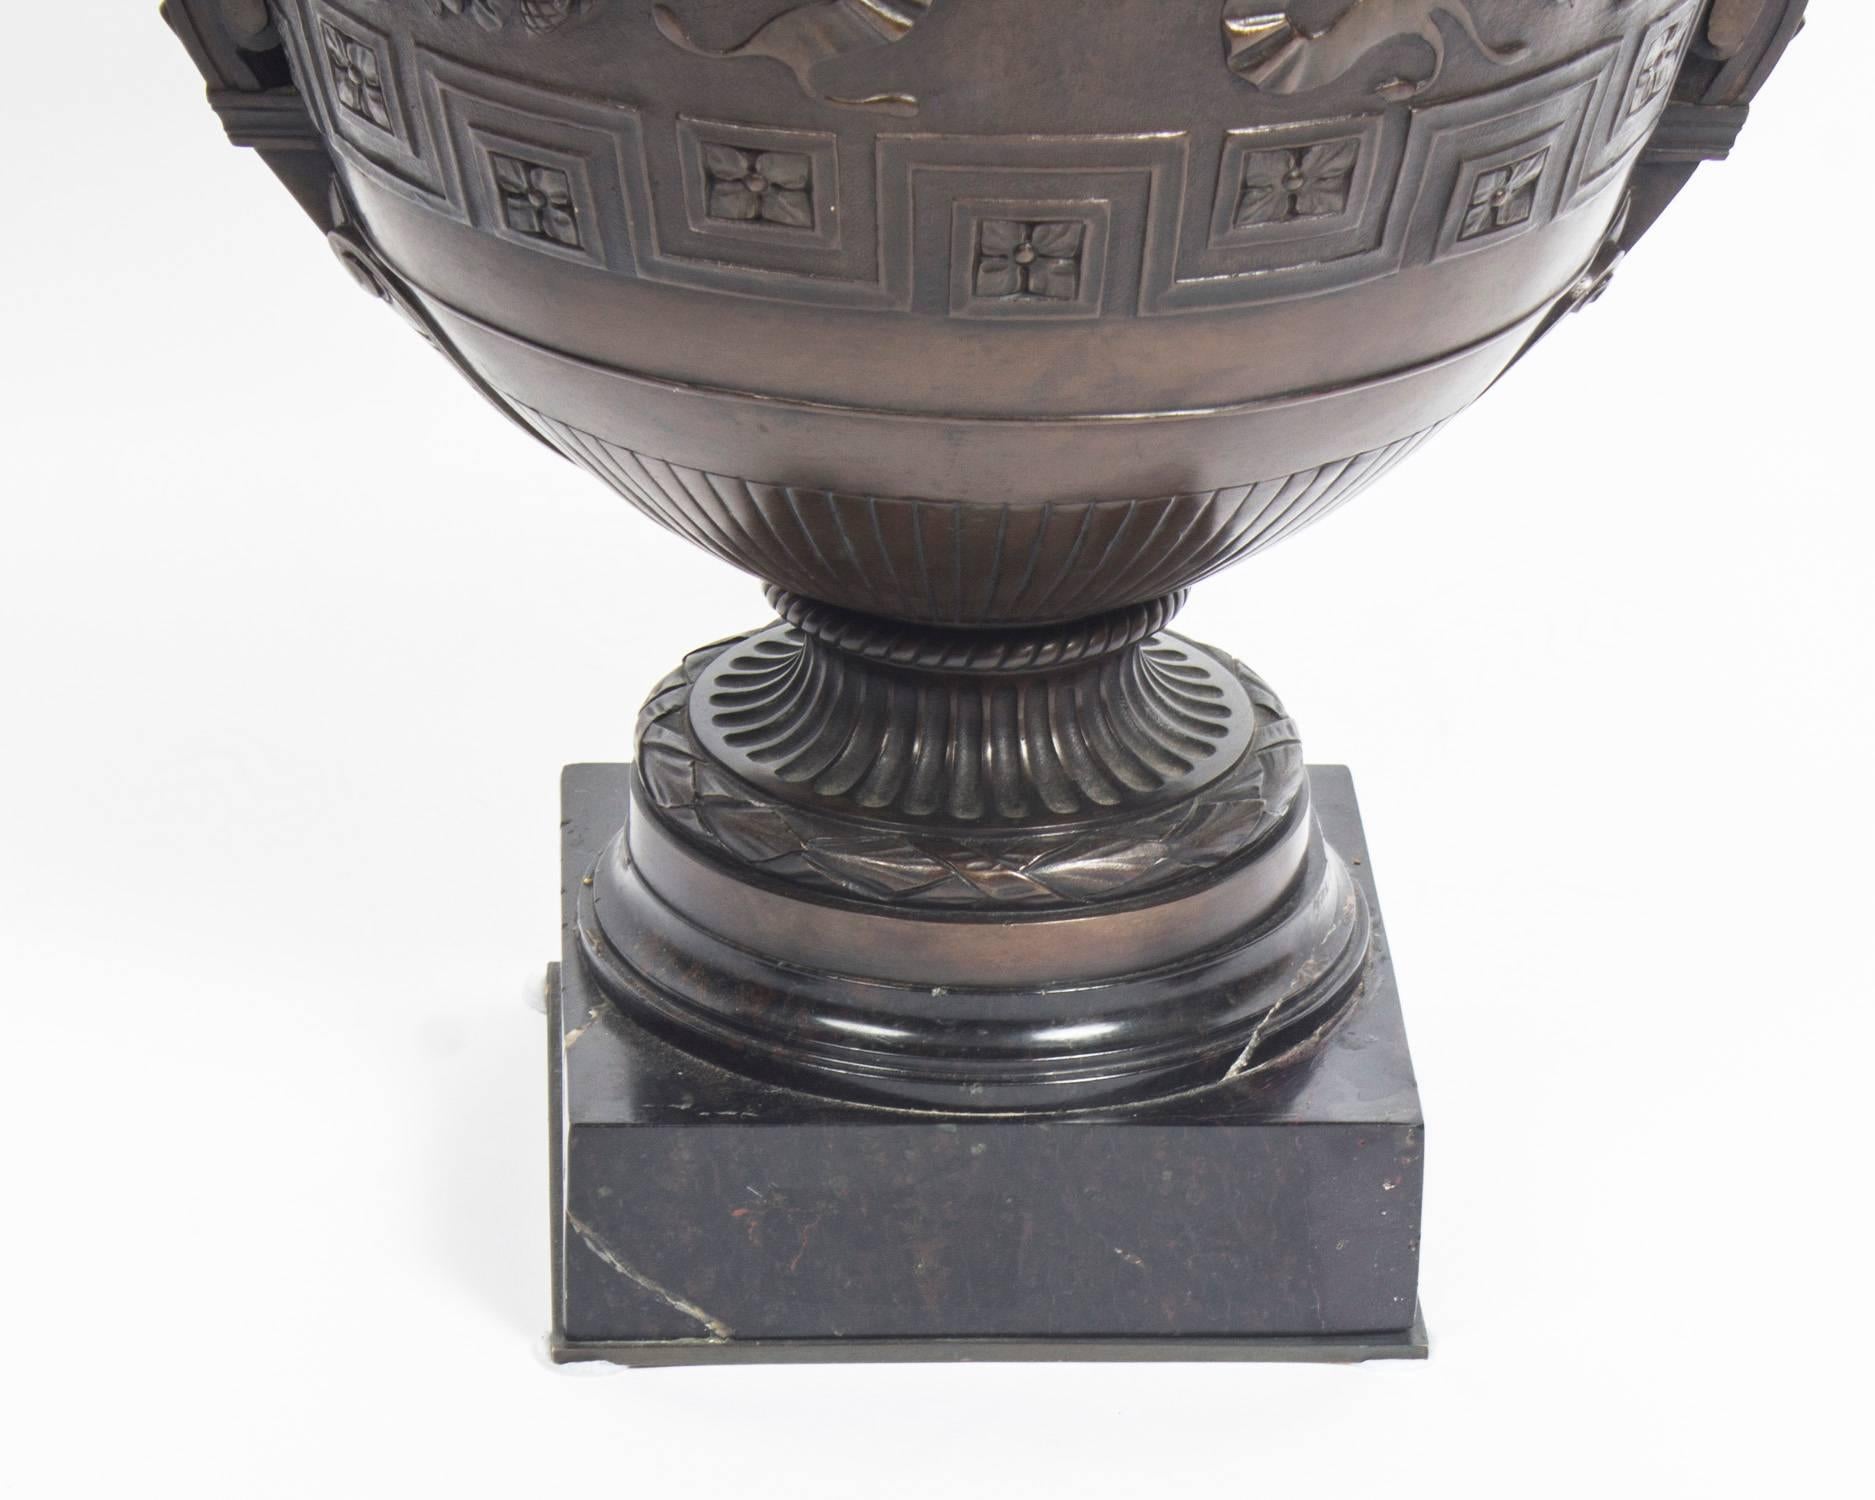 A superb antique Grand Tour patinated bronze Barbedienne style urn, circa 1870 in date.
 
This stunning Renaissance style patinated bronze urn is cast in the manner of Barbedienne. The body is cast with a ribbon and floral garland frieze centred by